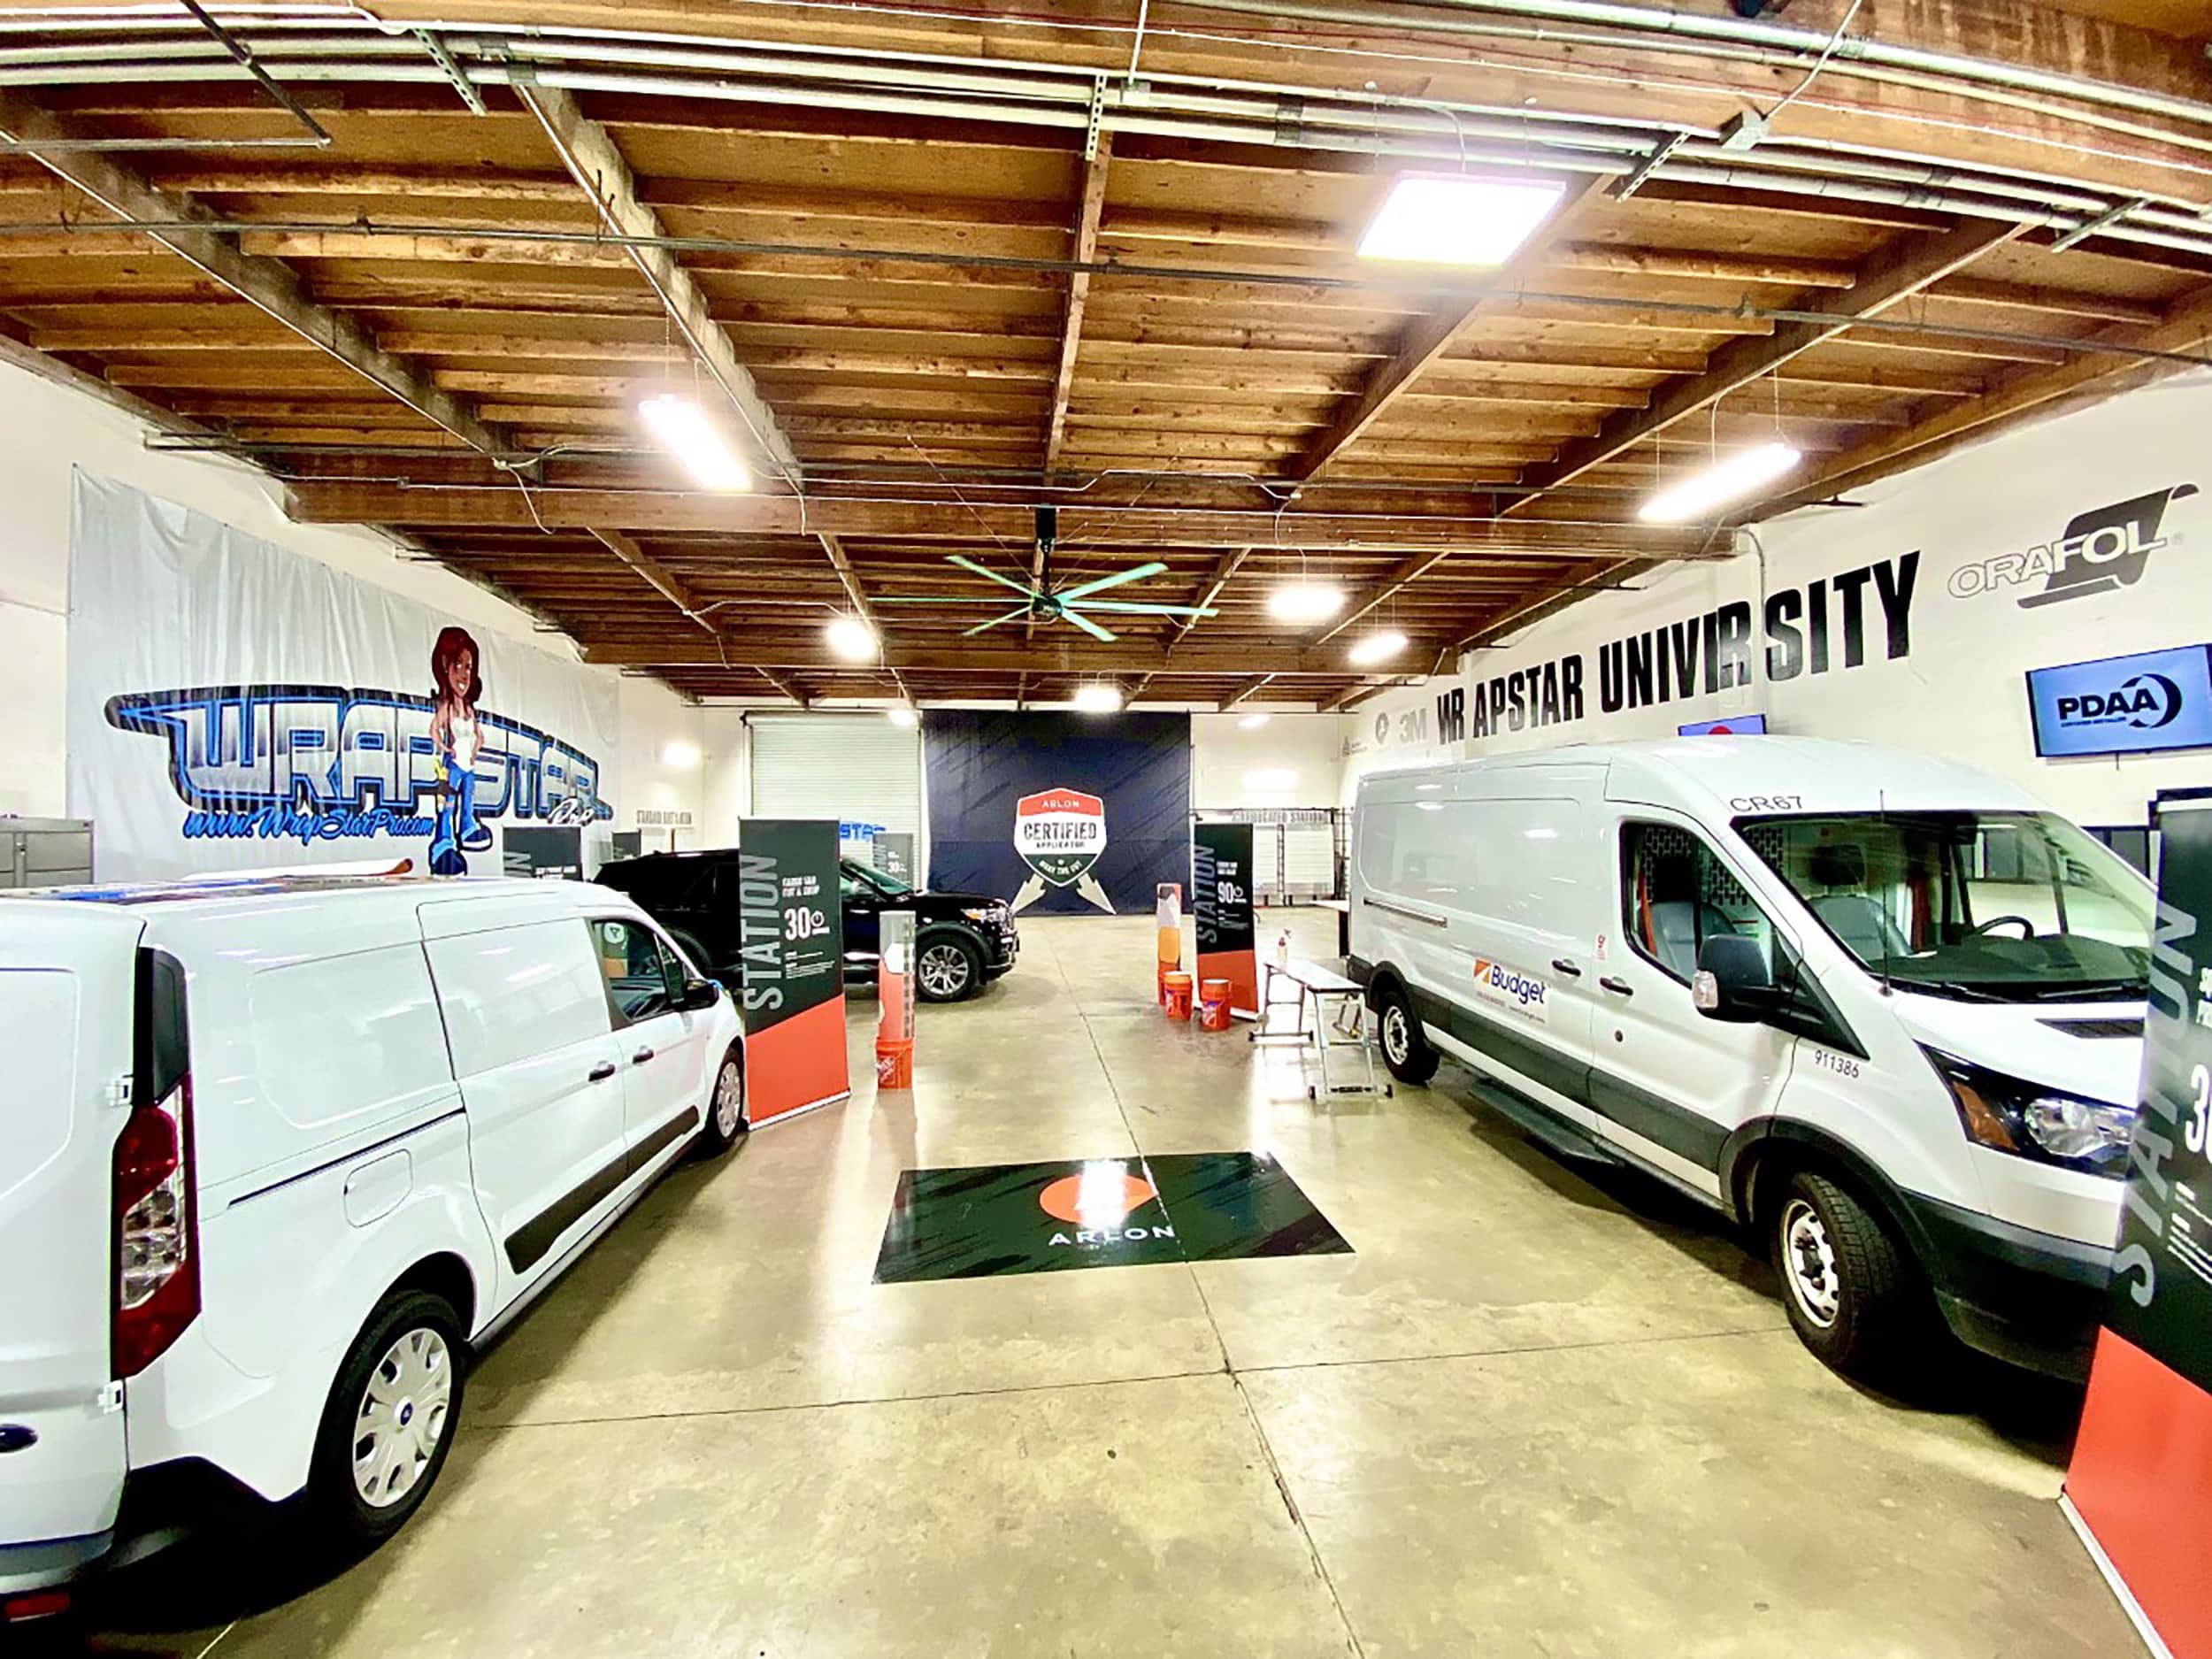 A glimpse into the WrapStar Pro shop converted into a vehicle fleet training space.